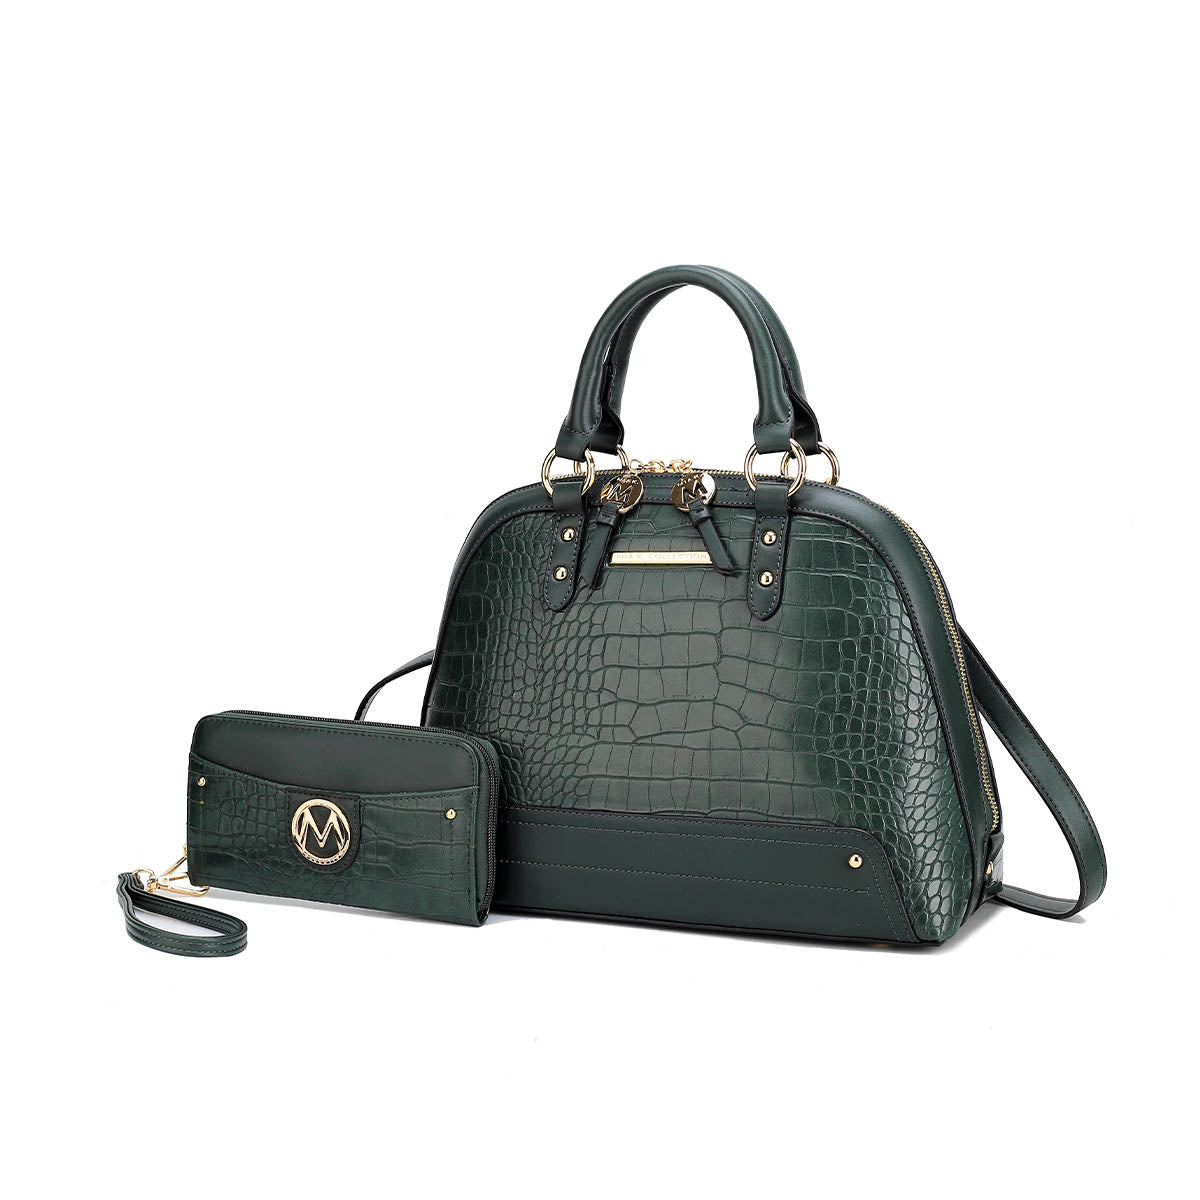 MKF Collection Nora Croco Women's Top-handle Satchel Handbag by Mia K-Forest Green-One Size-1